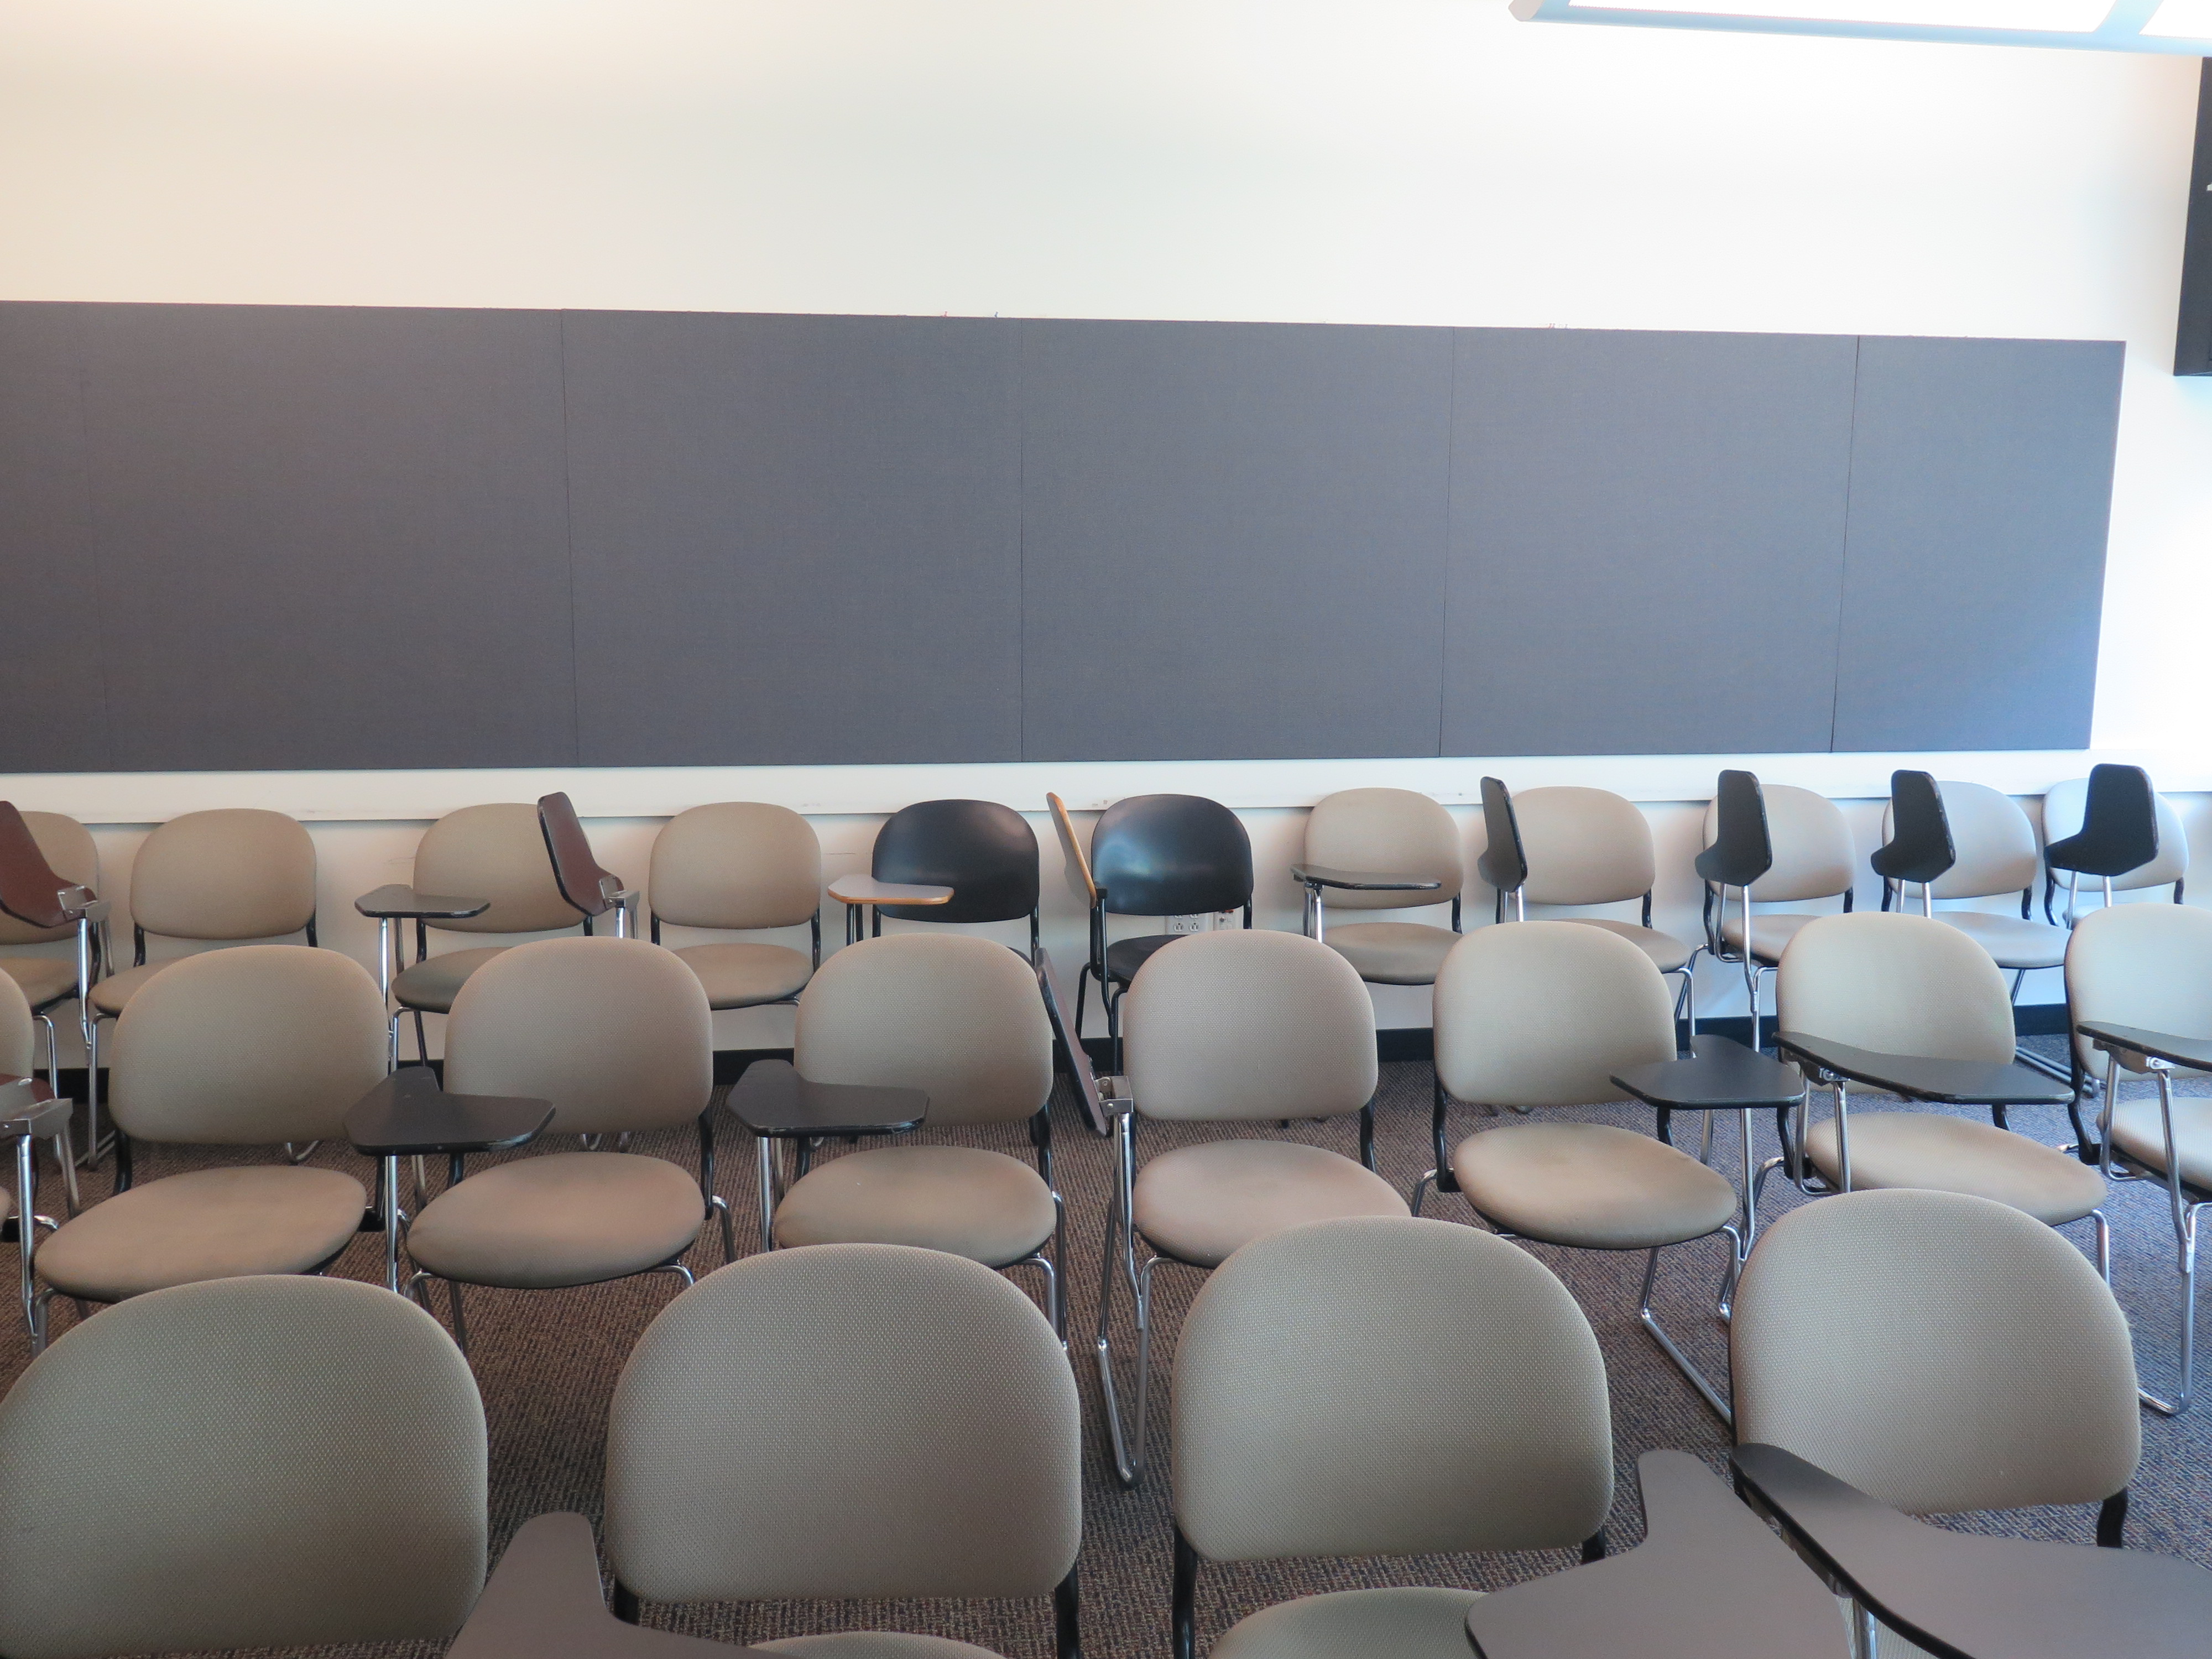 Room consists of carpet, moveable tablet armchairs and a table, podium and whiteboard located at the front of the room. 